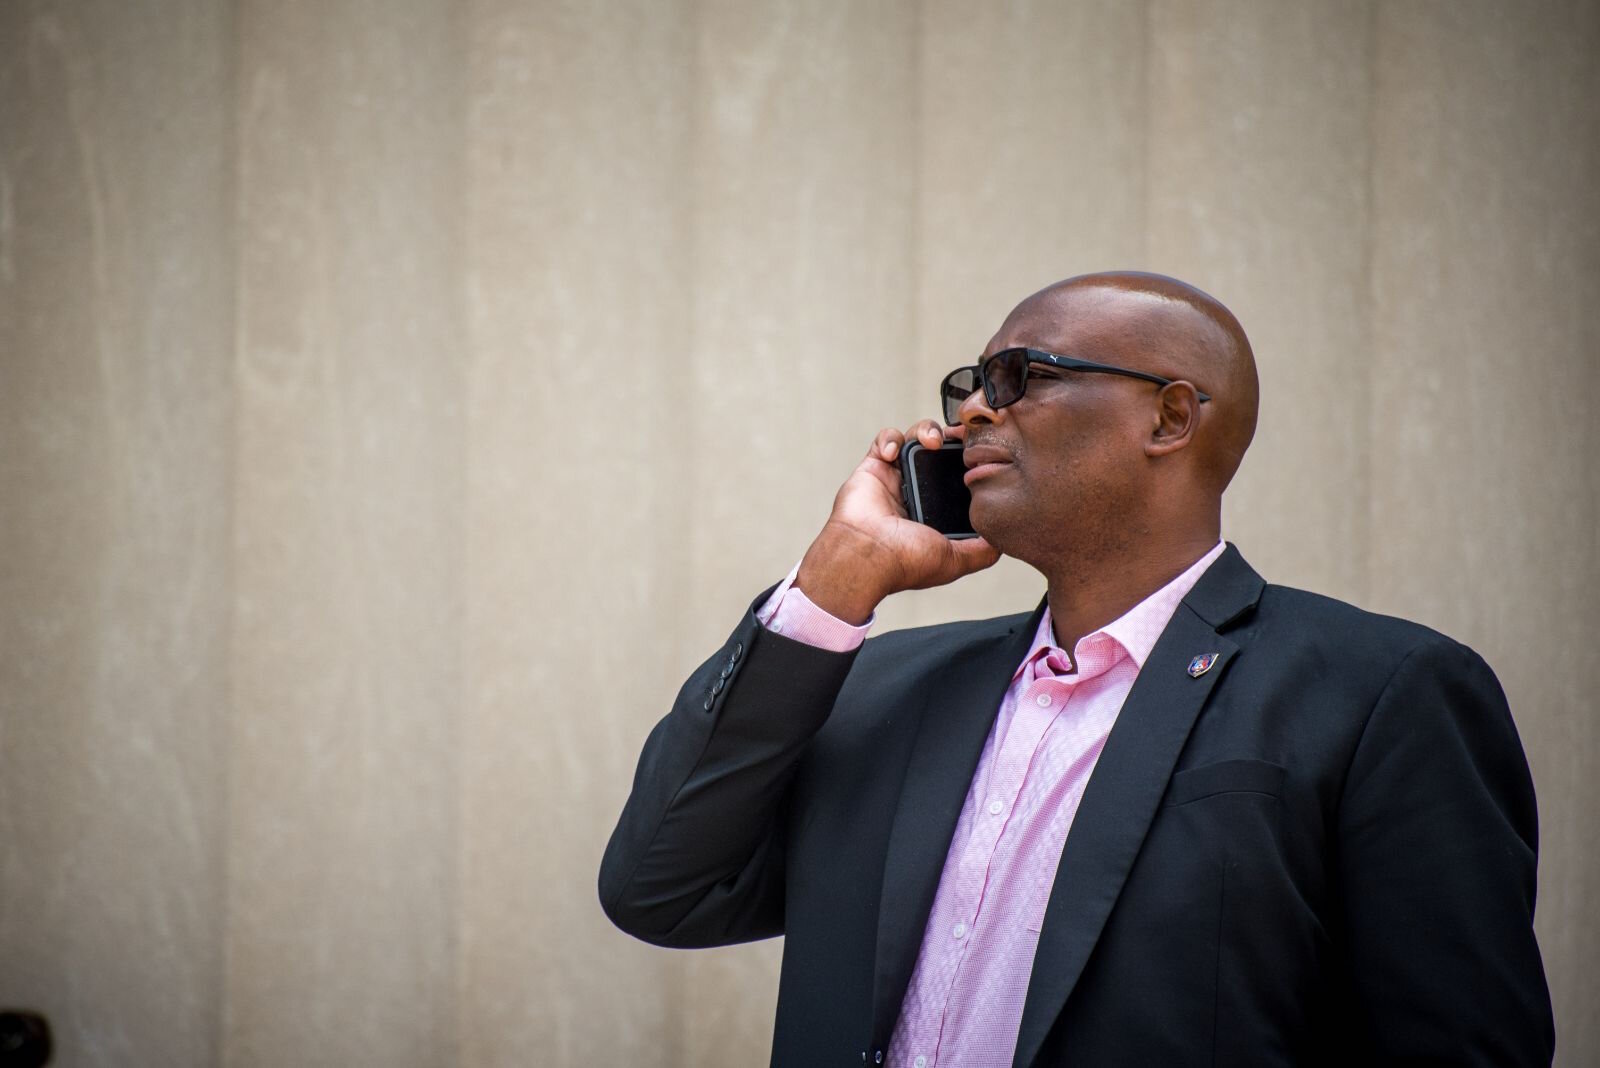 Department of Public Safety Chief Vernon Coakley Jr. takes a call as squad car sirens sound a block away from a press conference in front of Kalamazoo City Hall to announce a $400 million donation to the Foundation for Excellence.